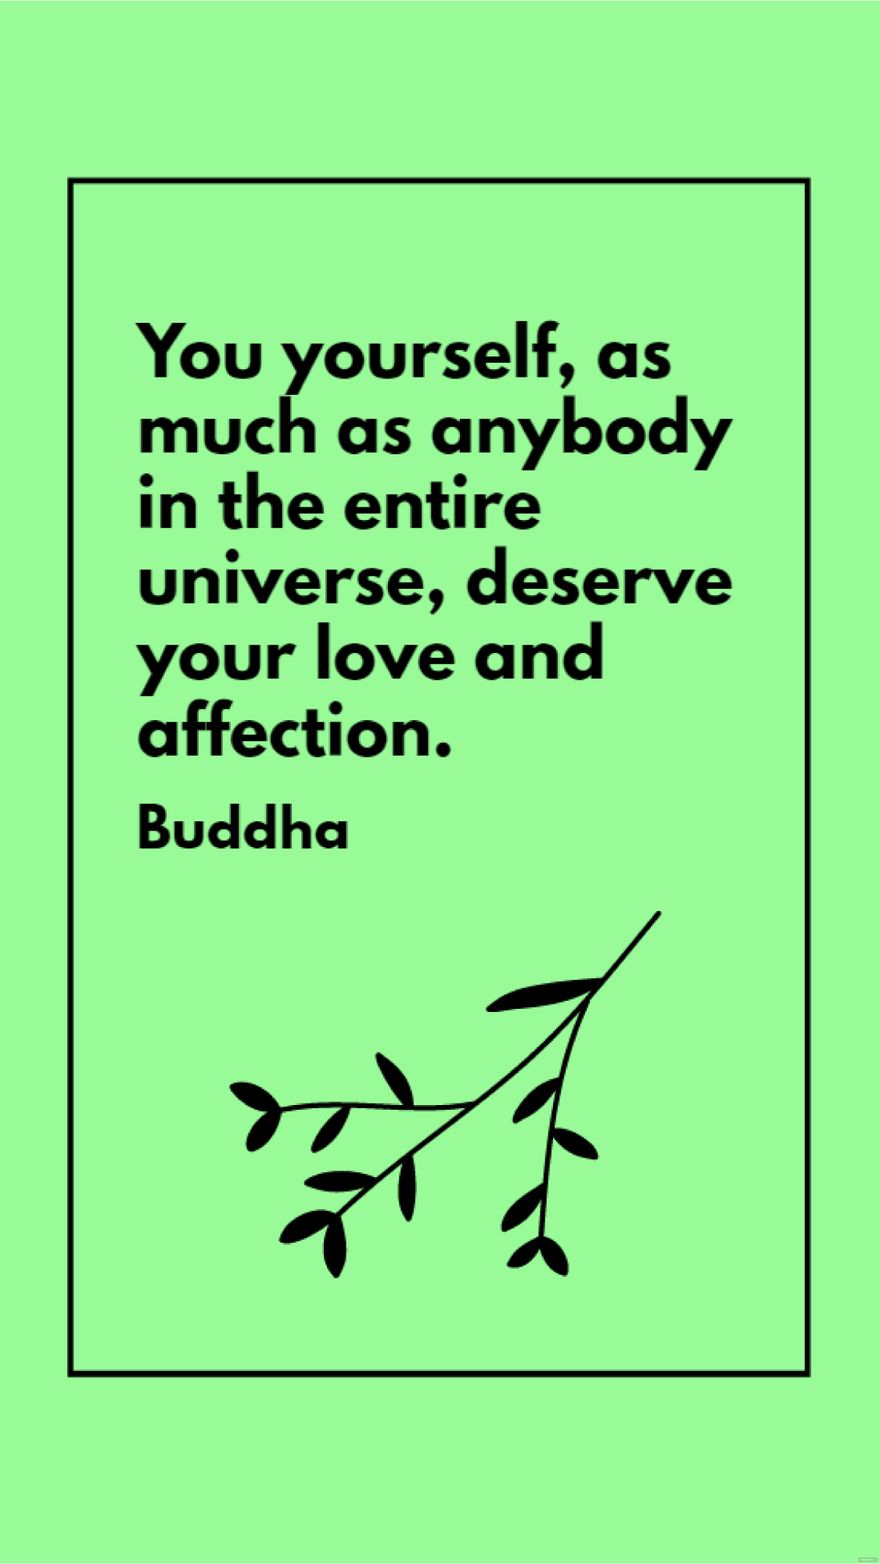 Free Buddha - You yourself, as much as anybody in the entire universe, deserve your love and affection. in JPG